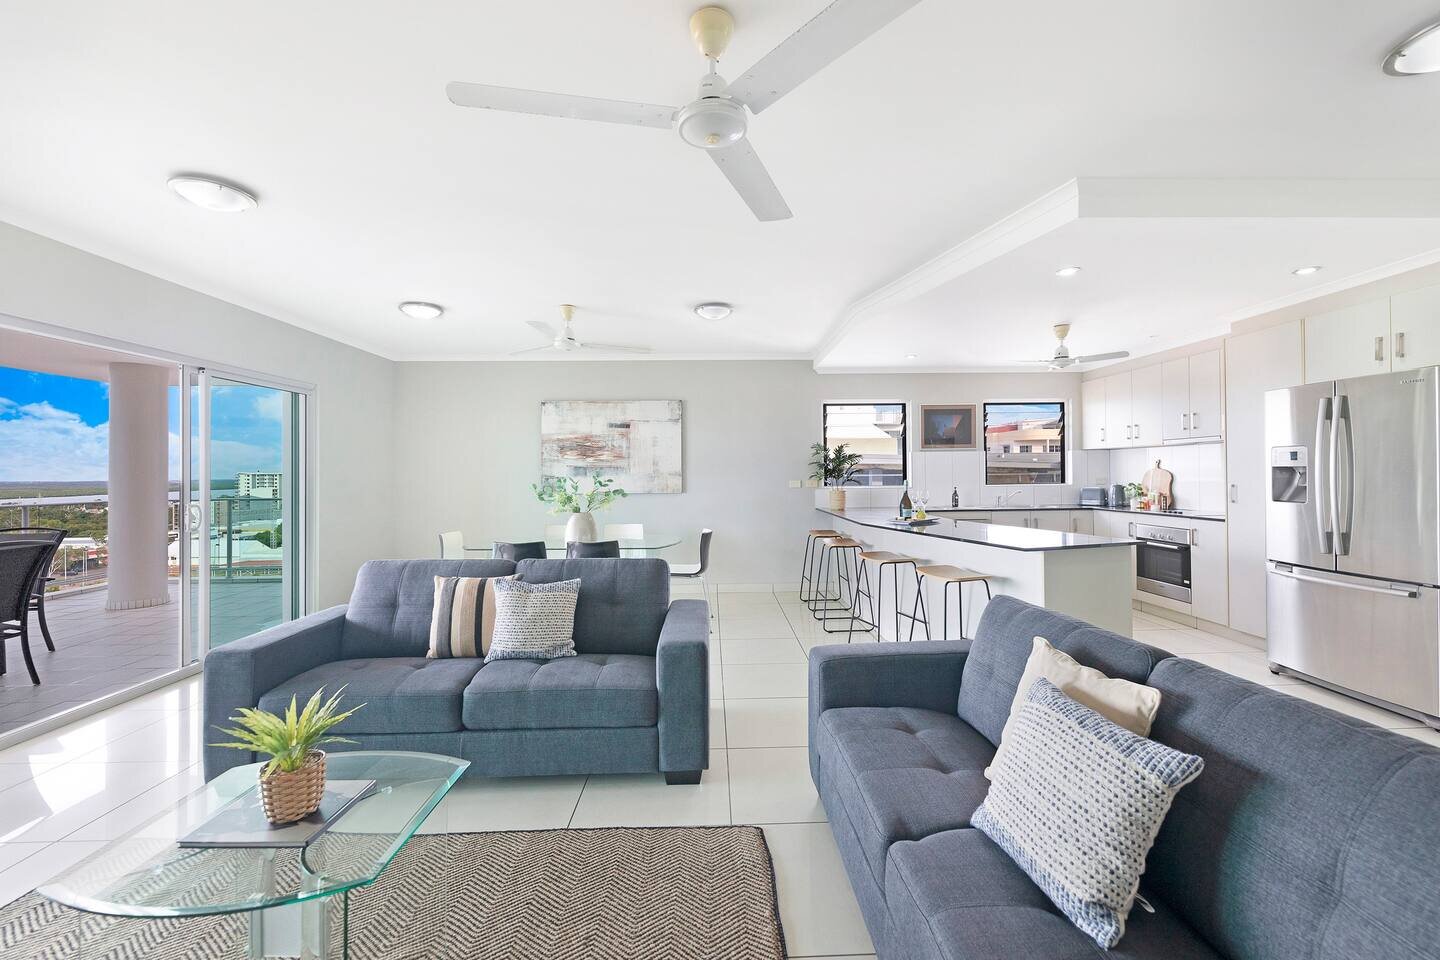 ✨ Alta Vista - City View Oasis in the Heart of Darwin ✨

🌴This city central gem with floor-to-ceiling glass doors and a large balcony offers up the perfect spot to watch the storms roll through, or the city lights twinkle at night. Or take a refresh